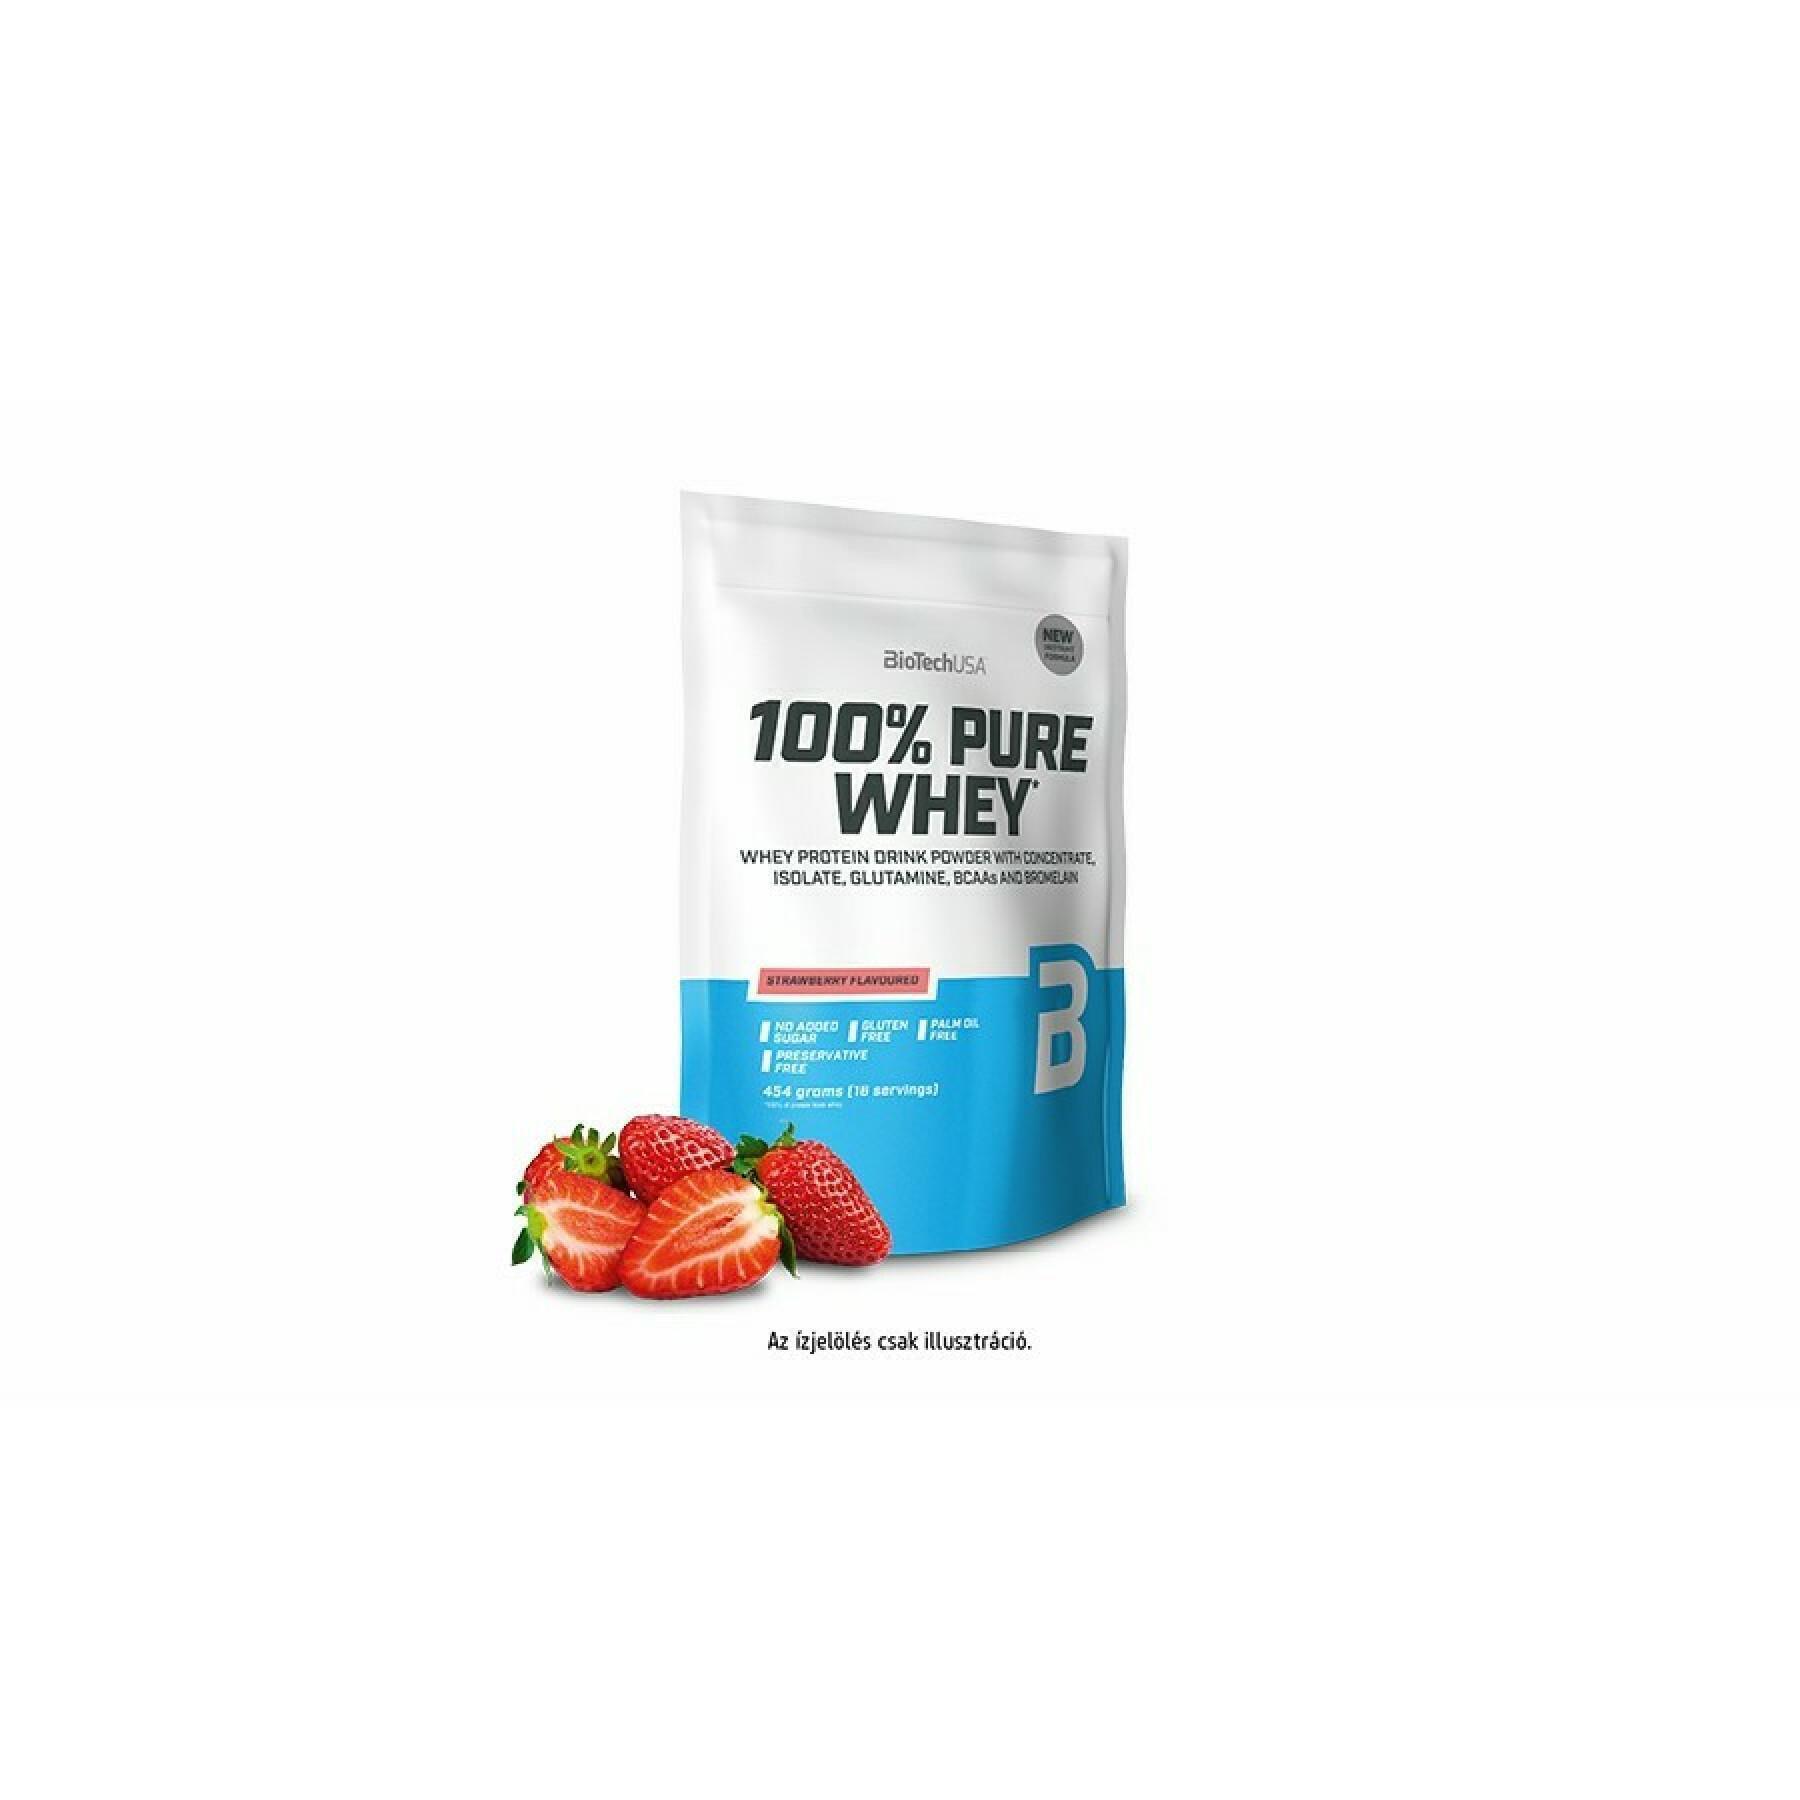 100% pure whey protein bags Biotech USA - Fraise - 454g